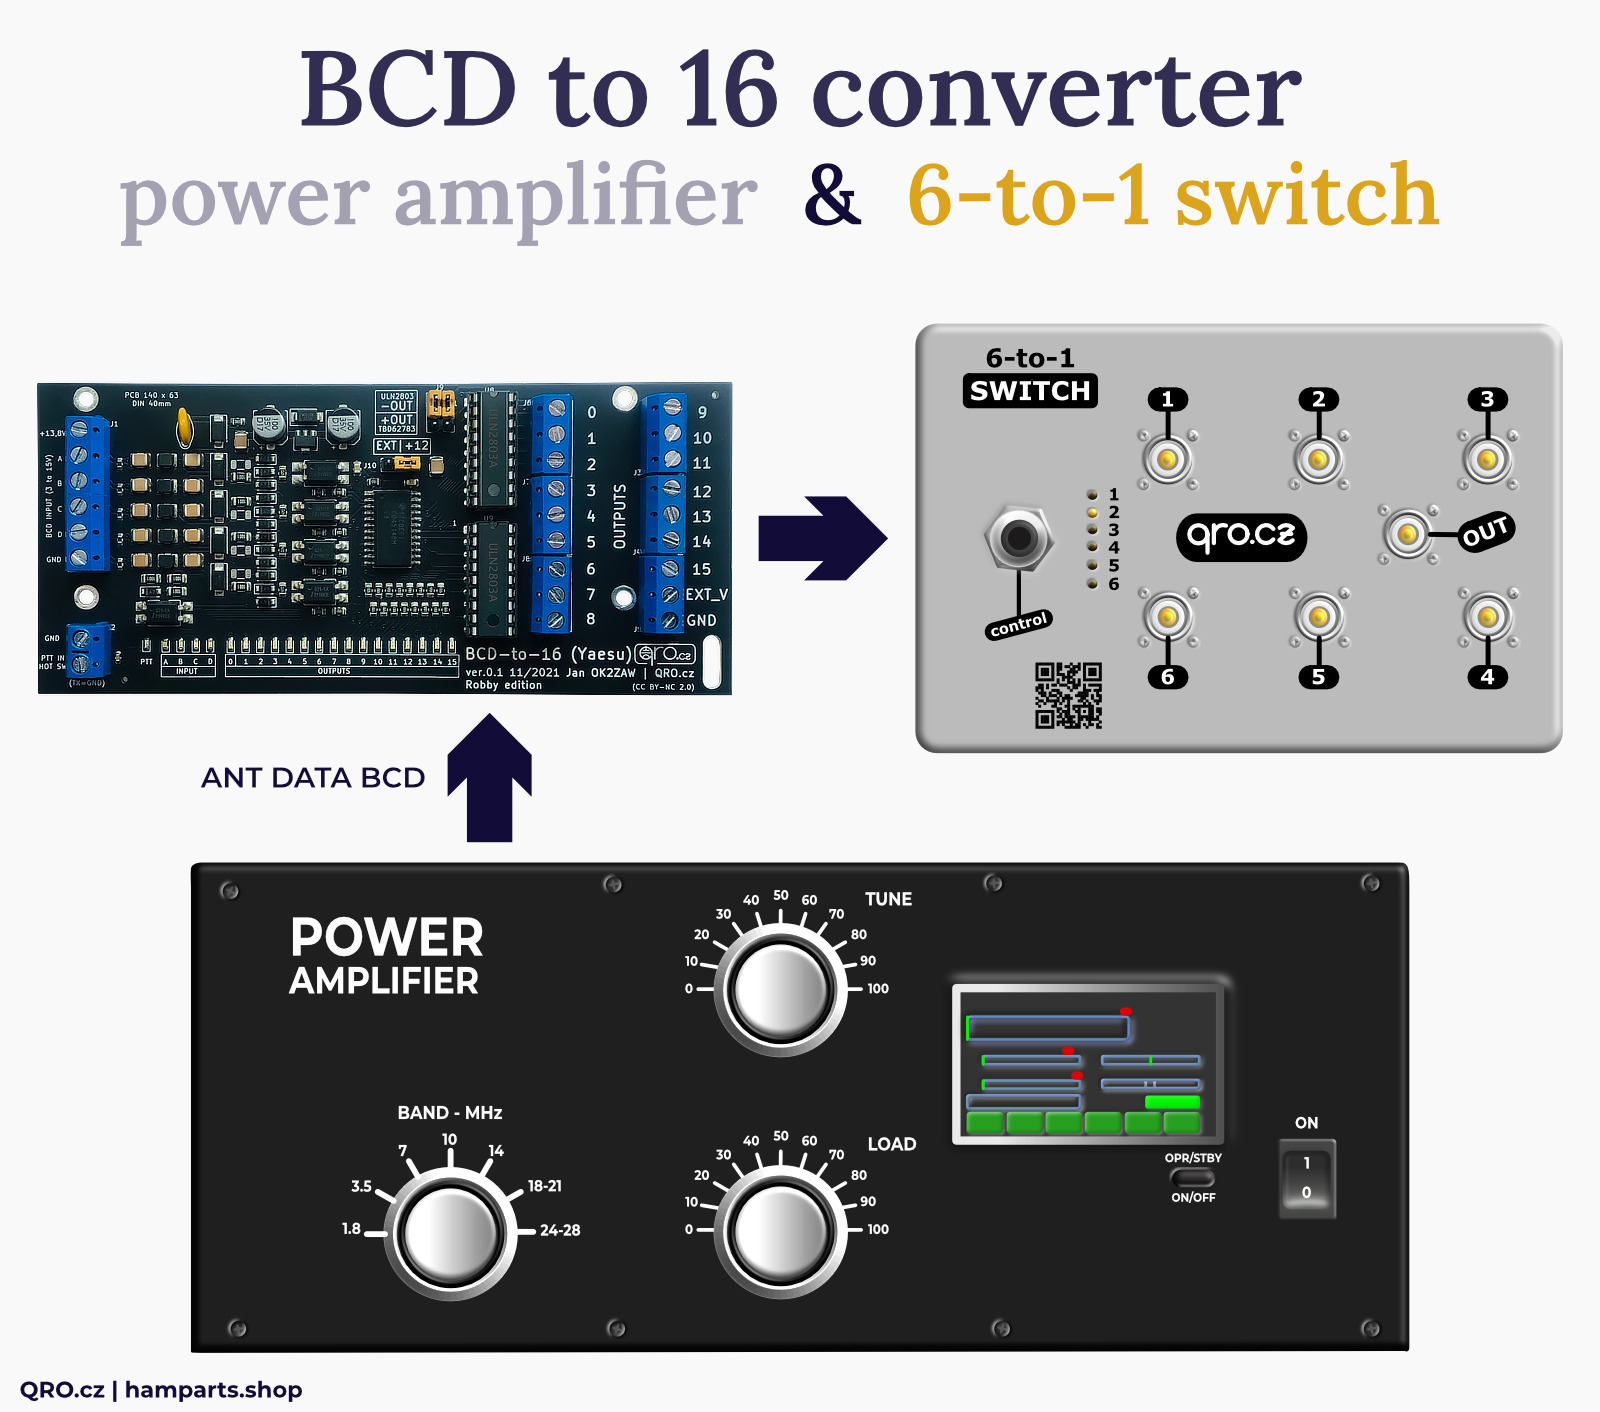 BCD to 16 version converter with 6 to 1 antenna switch by qro.cz hamparts.shop